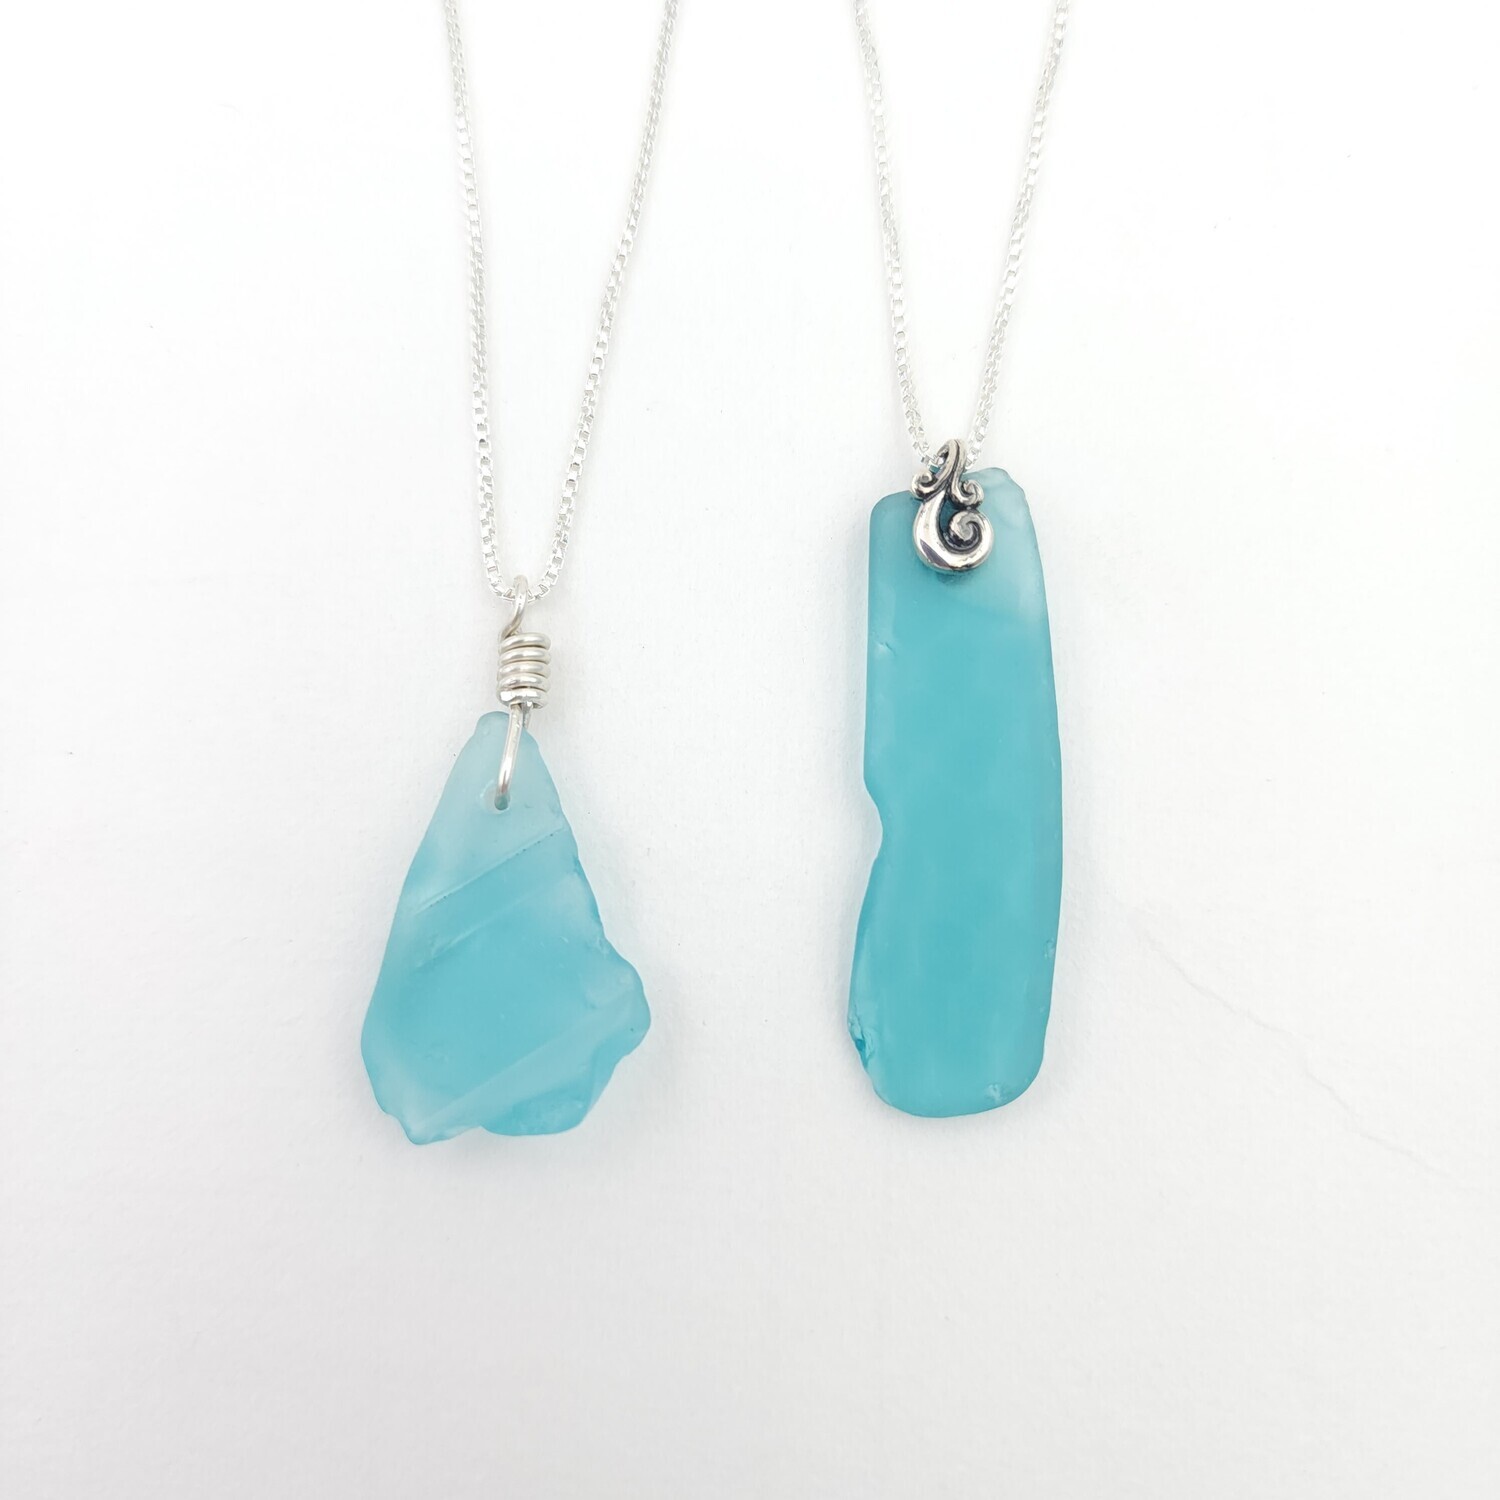 RESERVED: Light Blue Beach Glass Necklaces